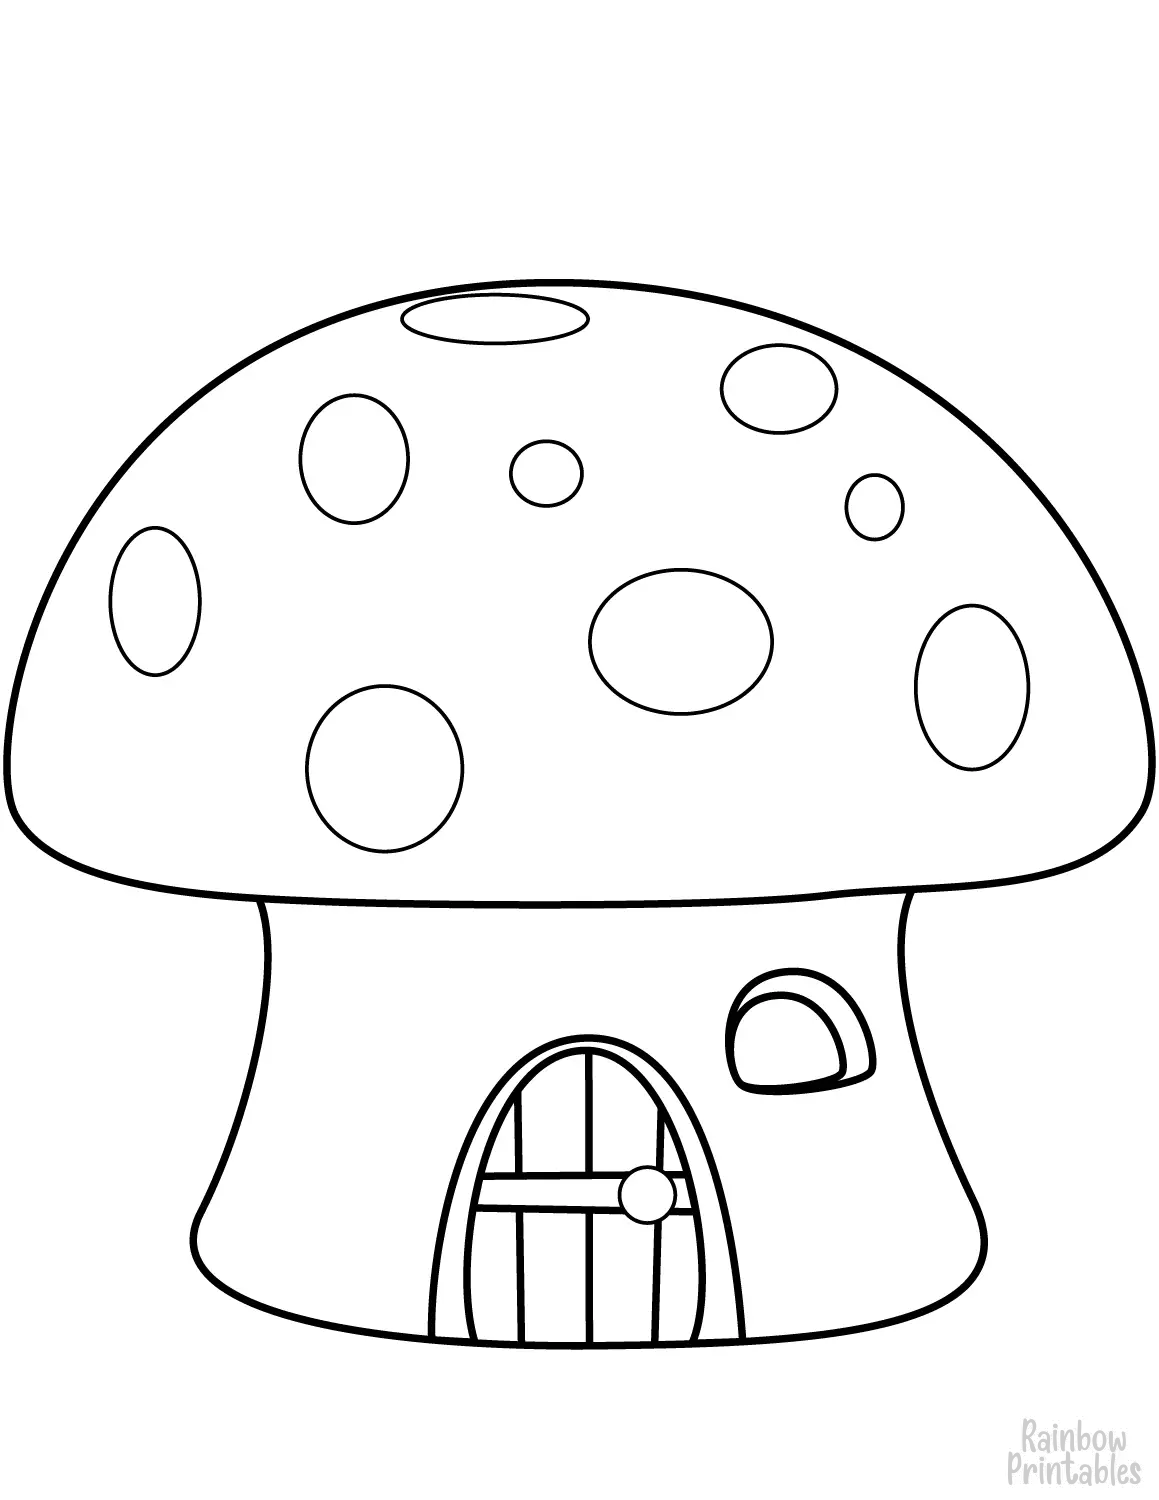 Whimsical Line Drawing Mushroom Cartoon Fantasy House Coloring Pages for Kids